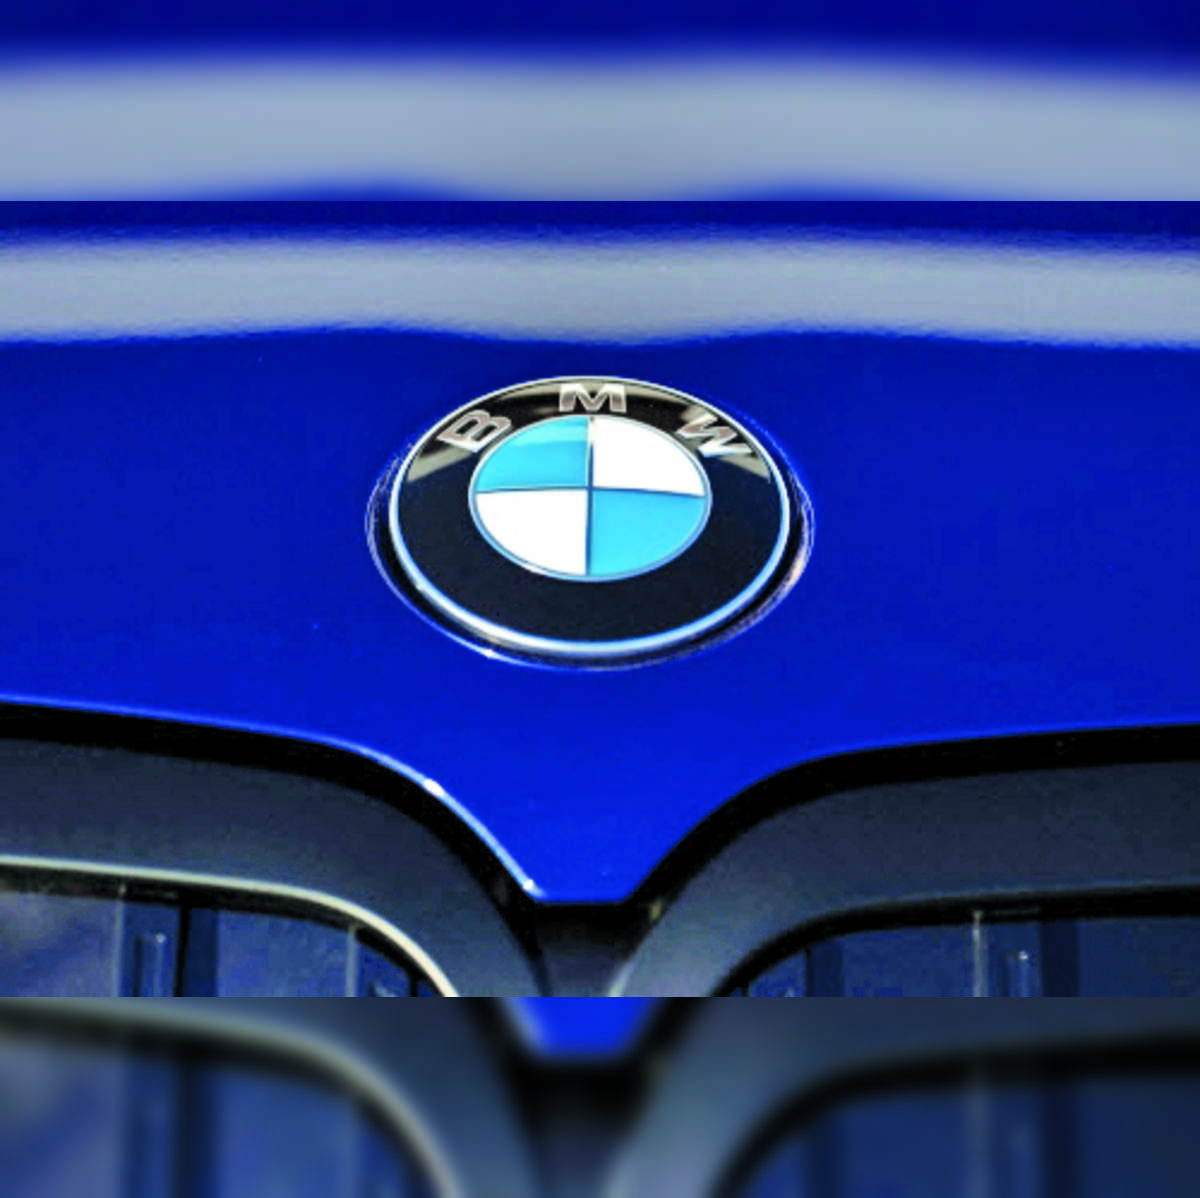 bmw: BMW Motorrad India expects sales momentum to continue; eyes  double-digit growth next year - The Economic Times